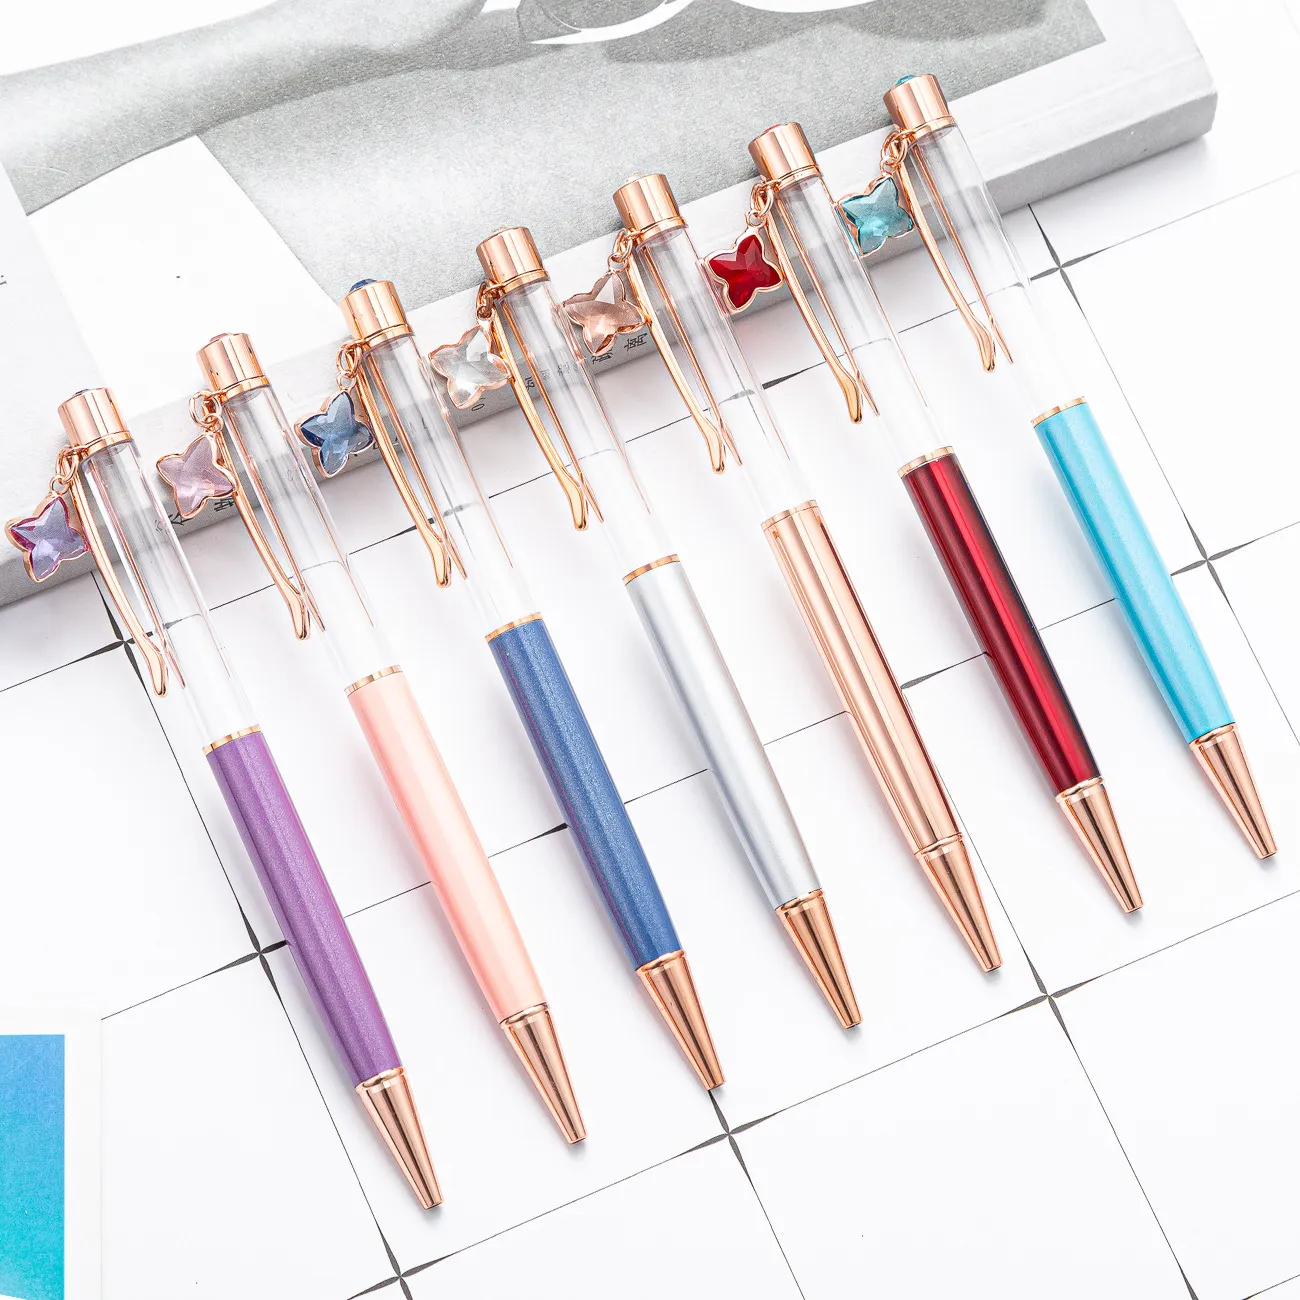 Japan US Korean Creative Oil Glitter Floating Pens Empty Tube Personalized DIY Building Favorite Liquid Sand Pen with Four-leaf Clover Lucky Pendant